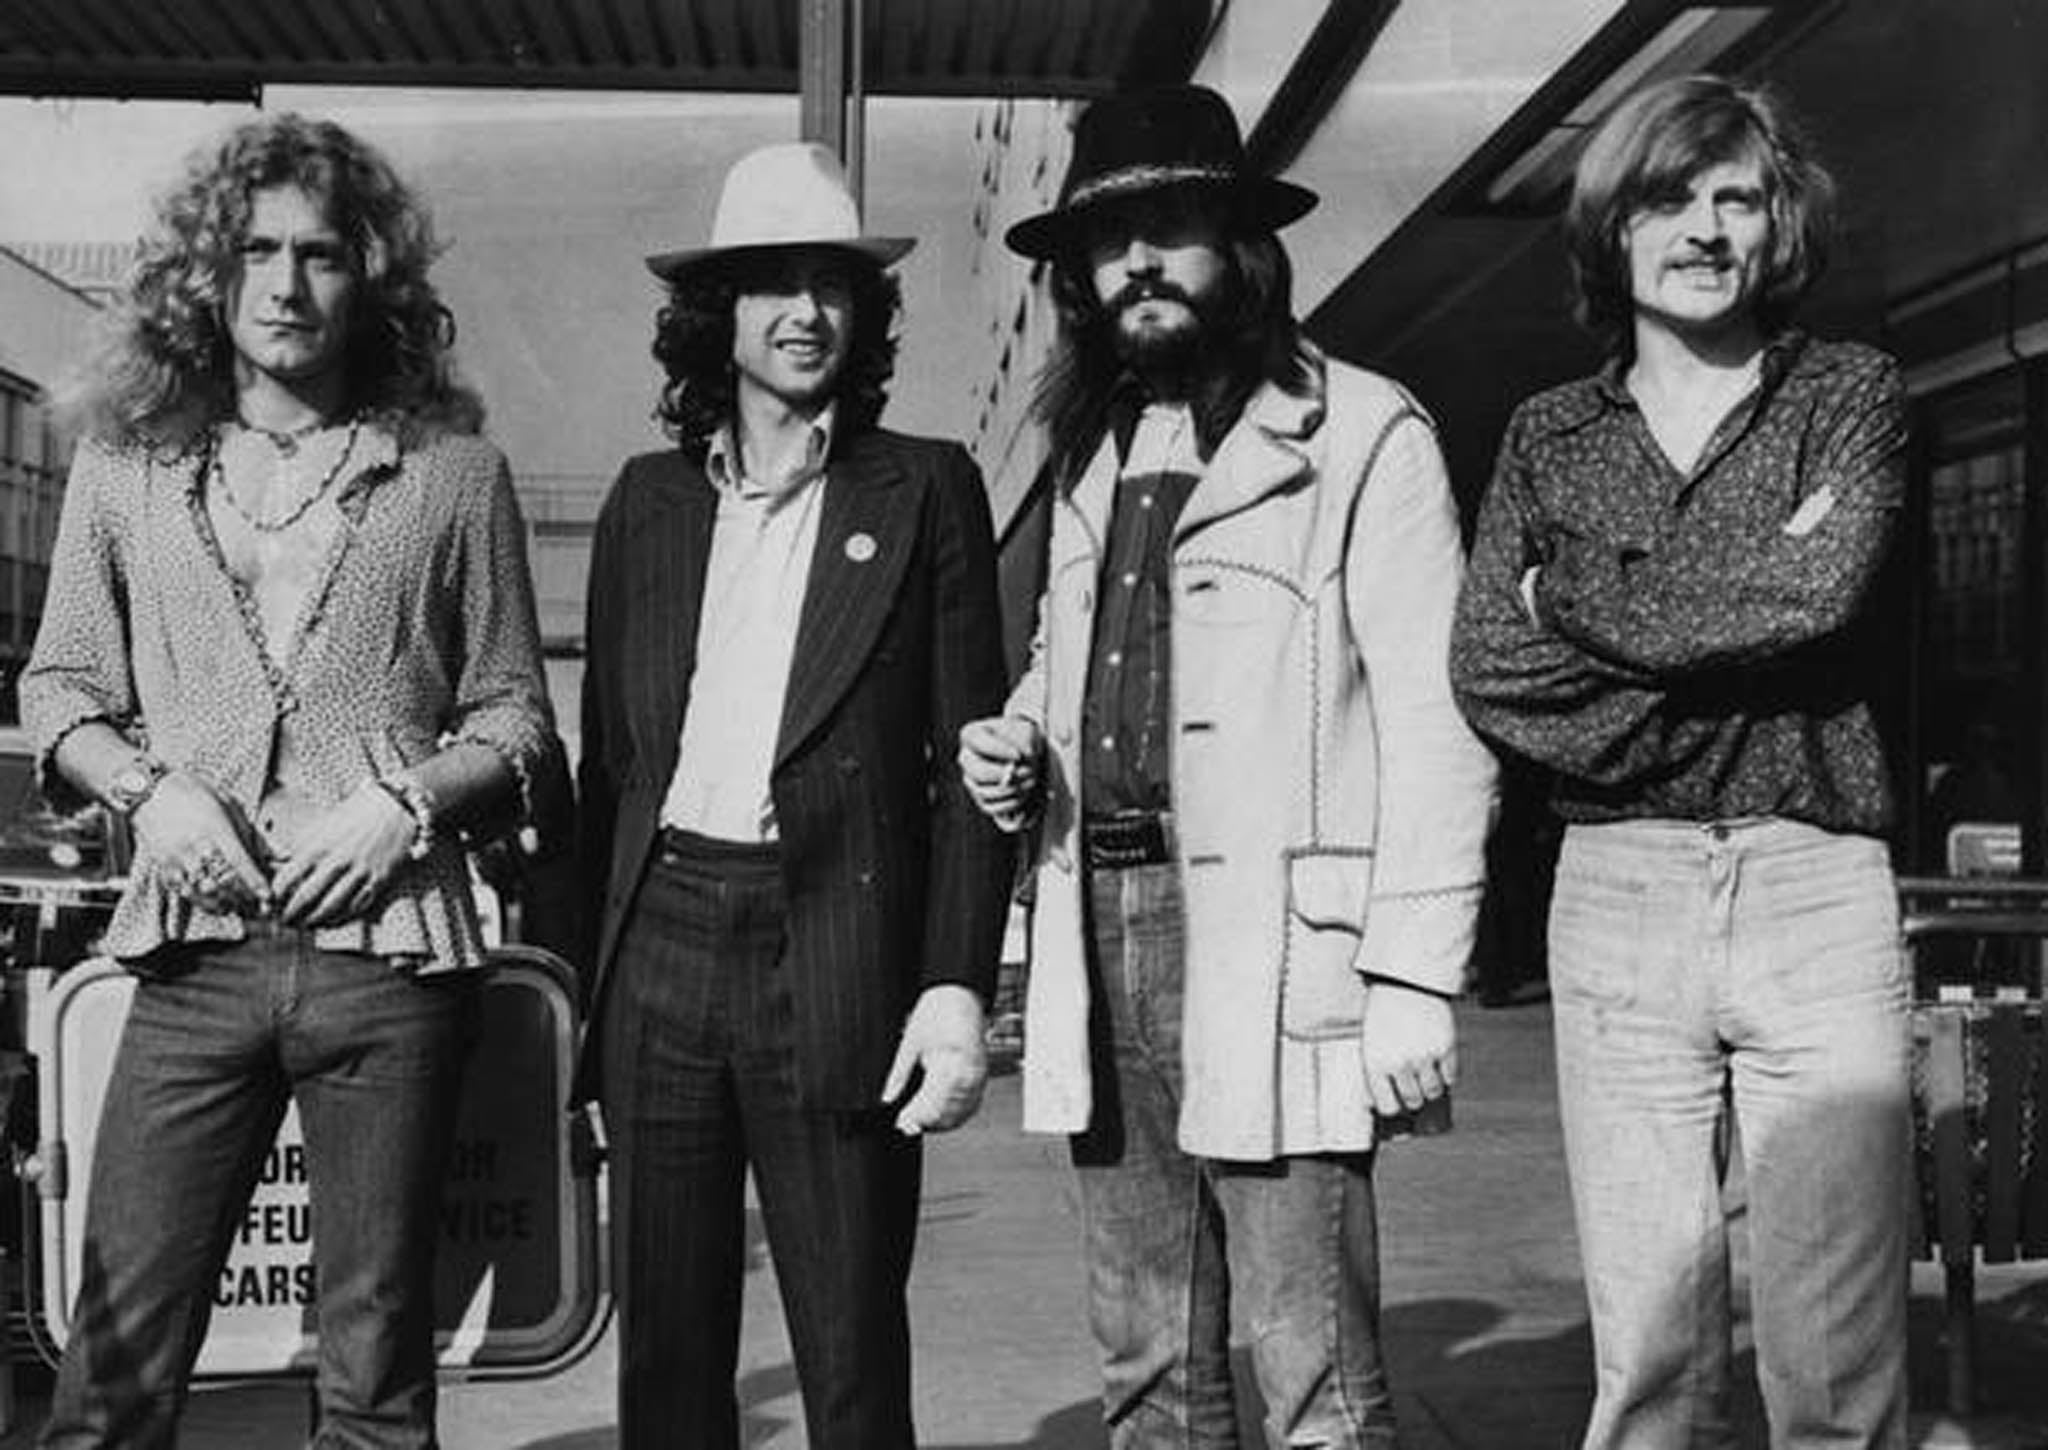 Fans will be able to rock out to Led Zeppelin on Spotify soon